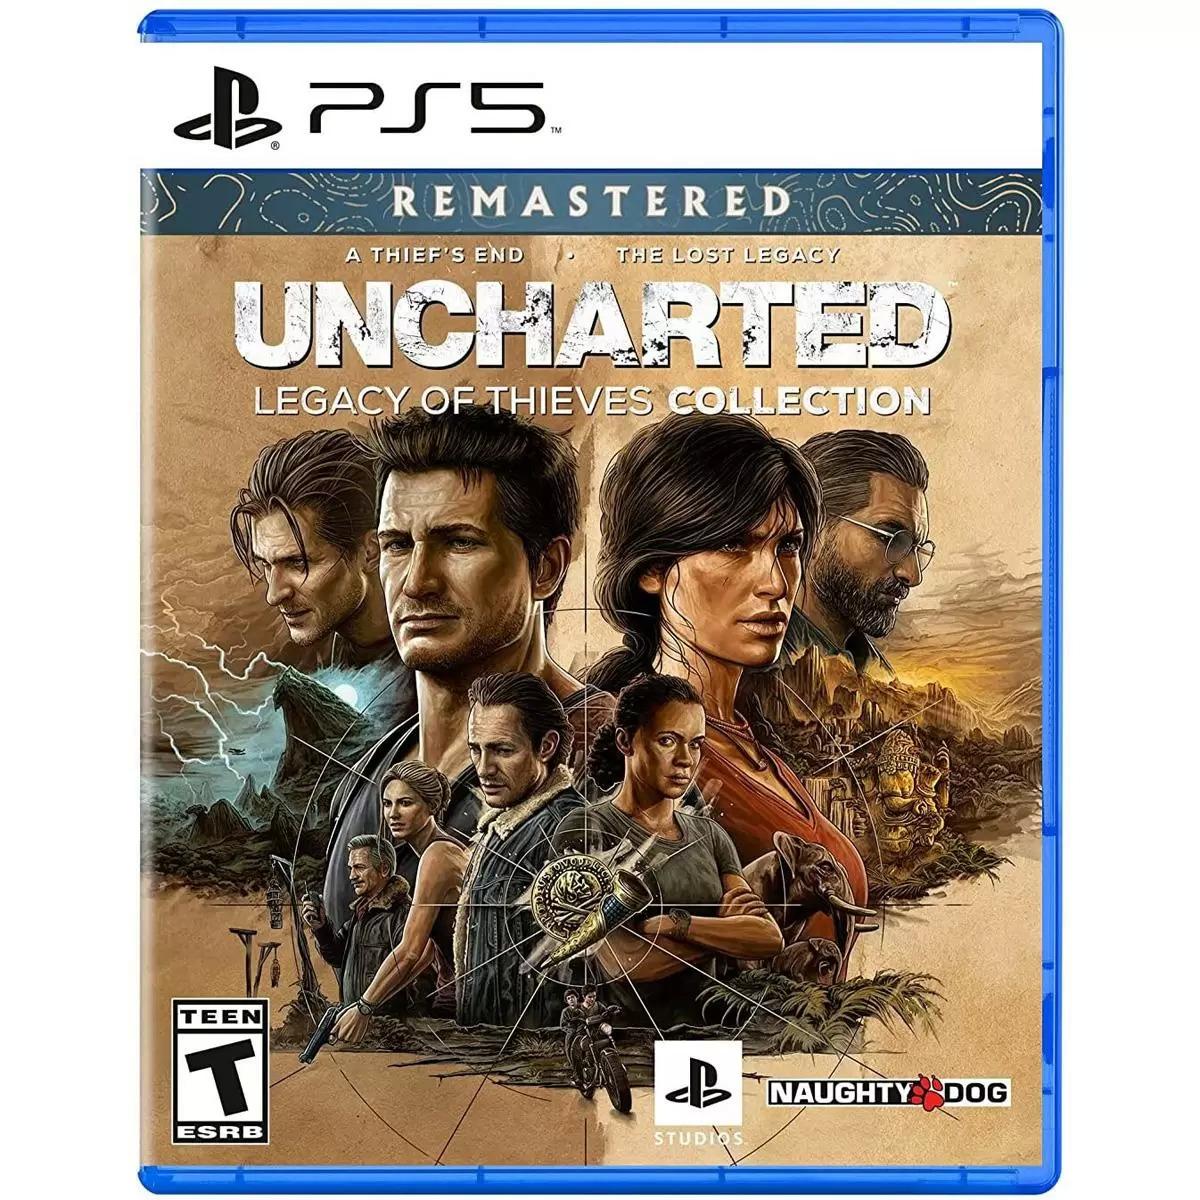 Uncharted Legacy of Thieves Collection PS5 for $29.99 Shipped